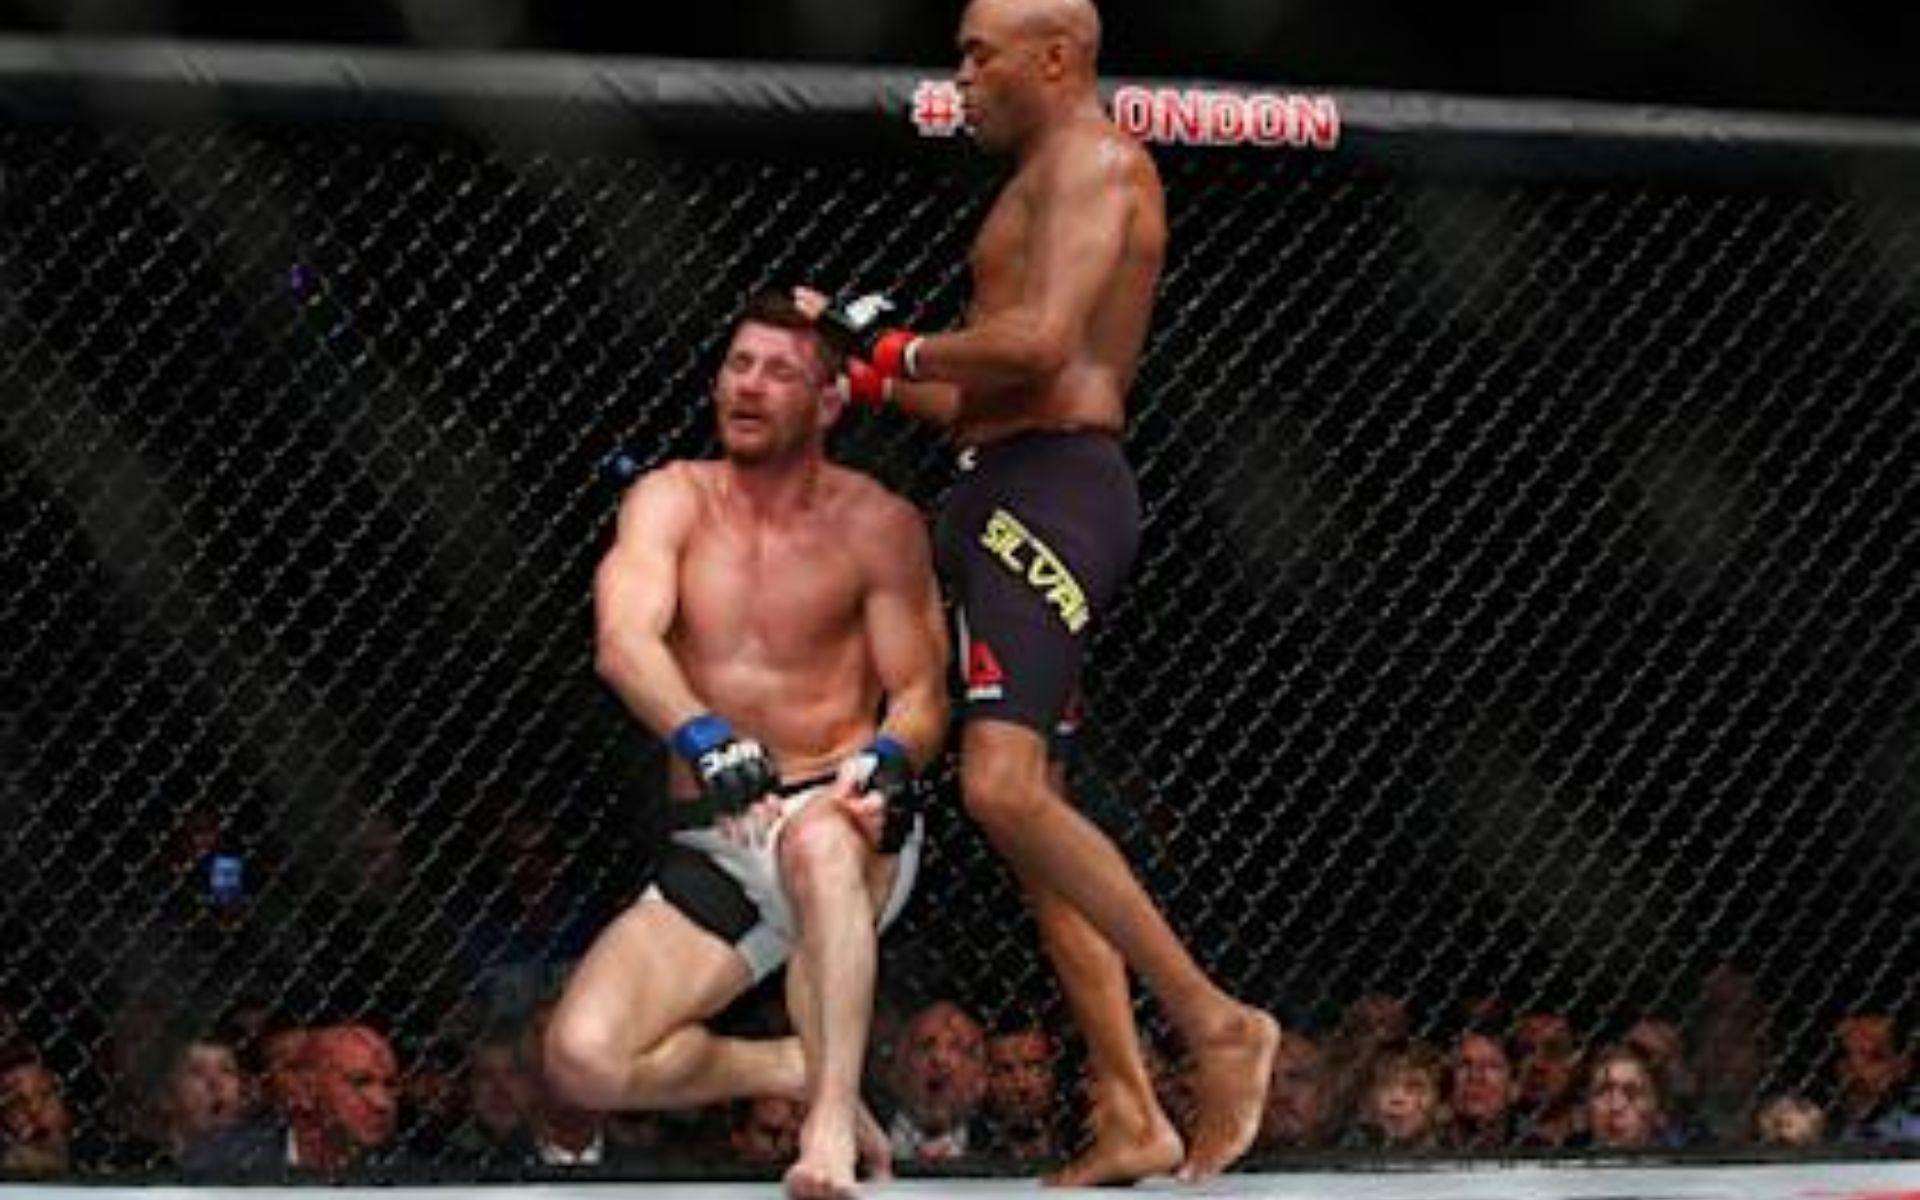 Anderson Silva was guilty of a premature celebration in his bout with Michael Bisping